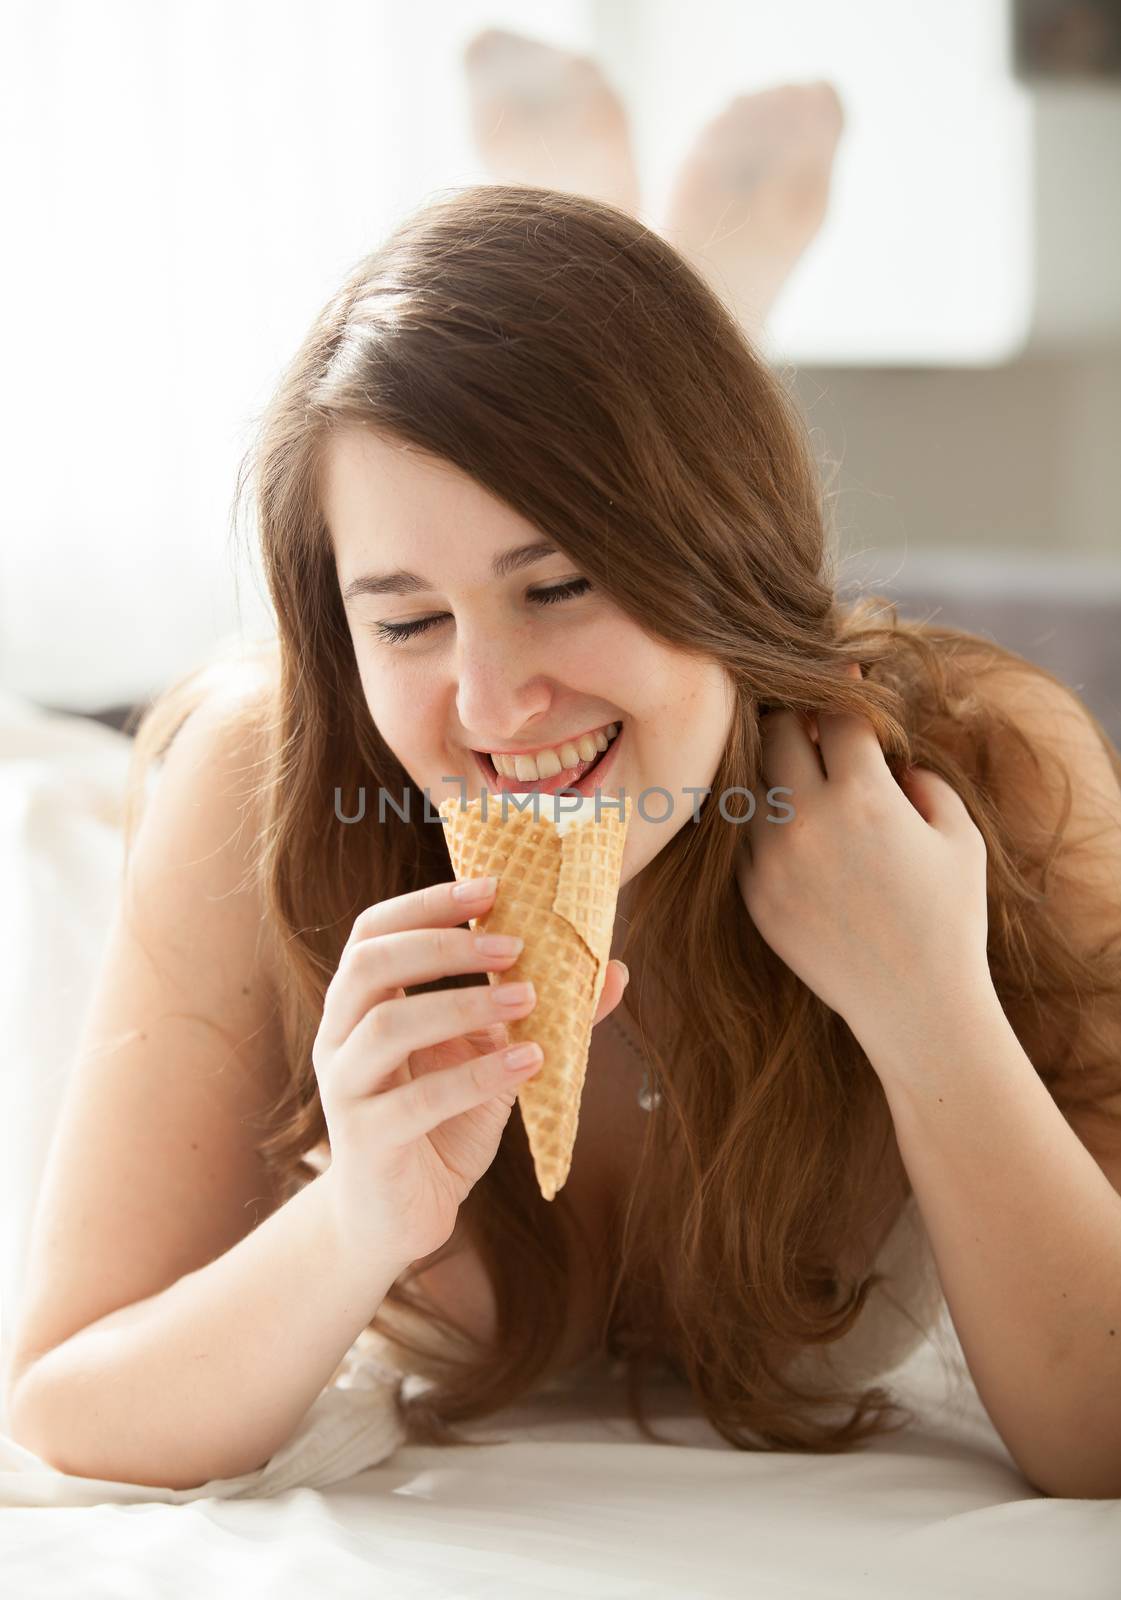 Brunette woman eating ice cream at bedroom